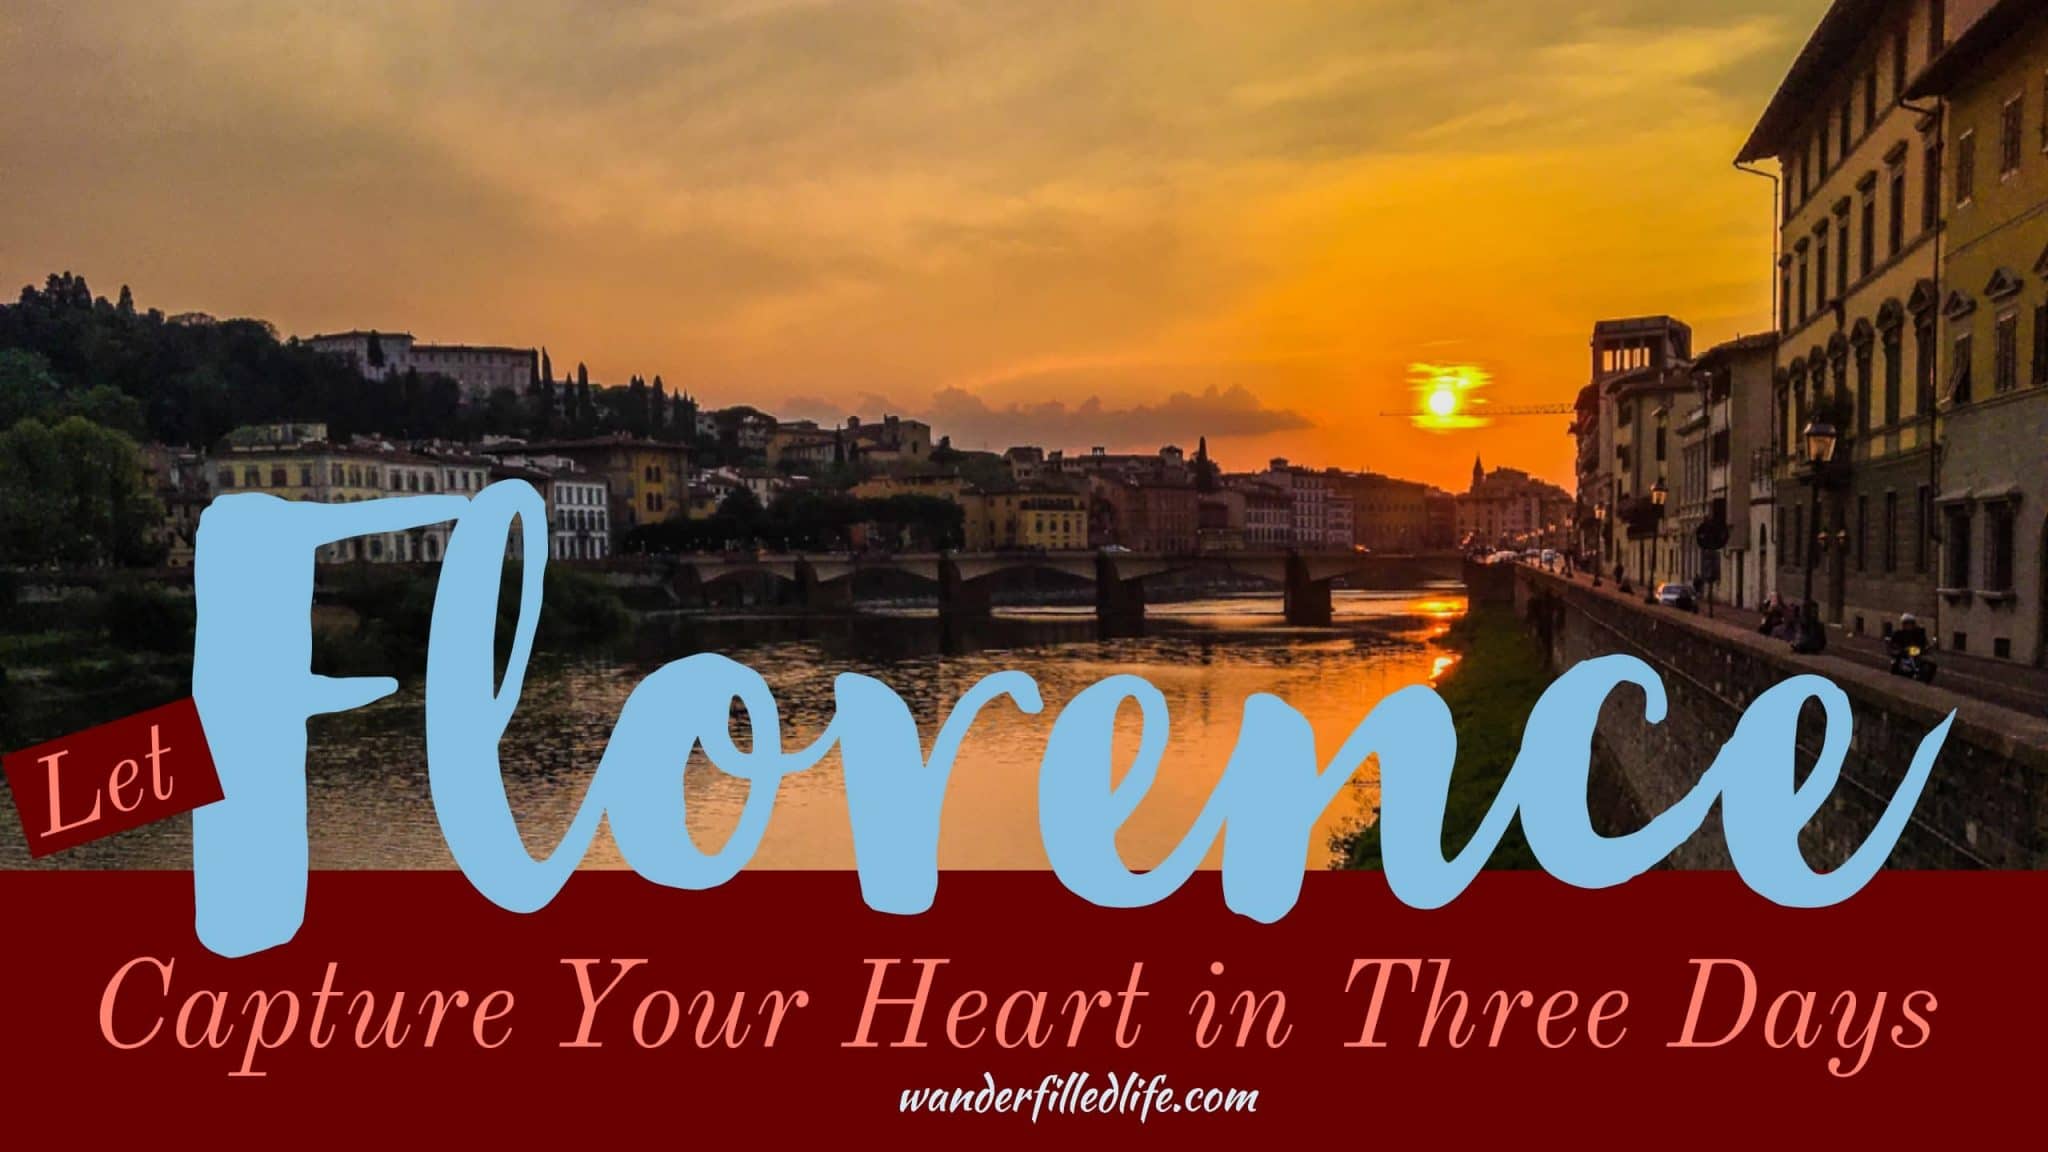 Let Florence Capture Your Heart in Three Days